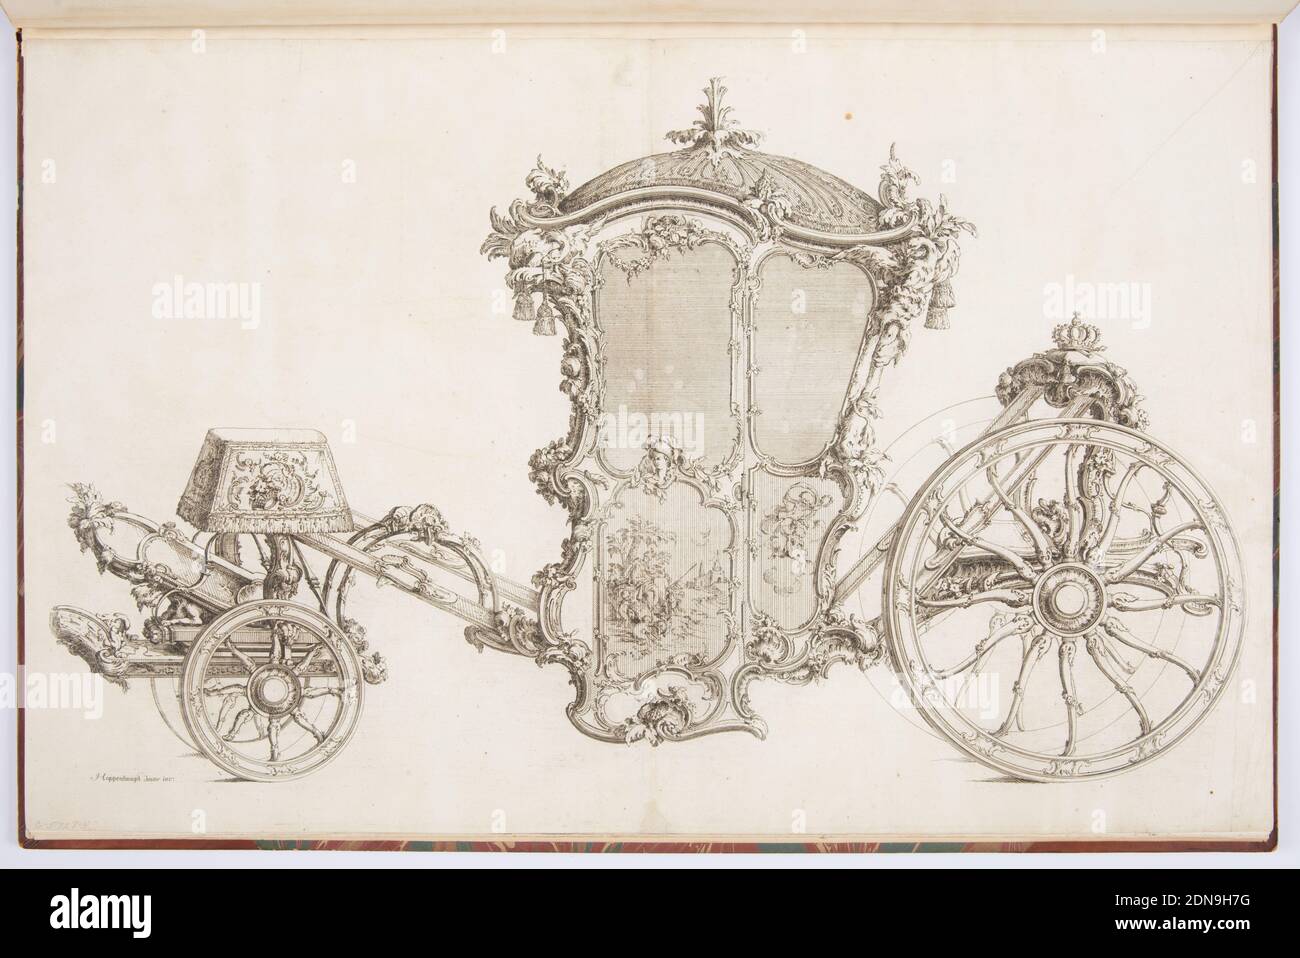 Design for a Carriage, Johann Michael Hoppenhaupt II, German, 1709–ca. 1778, Etching and engraving on white laid paper, Design for a carriage. The roof of the coach is dome-shaped with tassels hanging down. Plant ornament encompasses the coach from its door to its wheels. At the back of the coach, where the driver would presumably sit, a crown and possibly a riding crop are set upon a cushion. At the front of the coach, there are various household objects like a lamp and ornate, framed mirror. The carriage's door has a screen-like window, and below this, a framed pastoral scene., Berlin Stock Photo